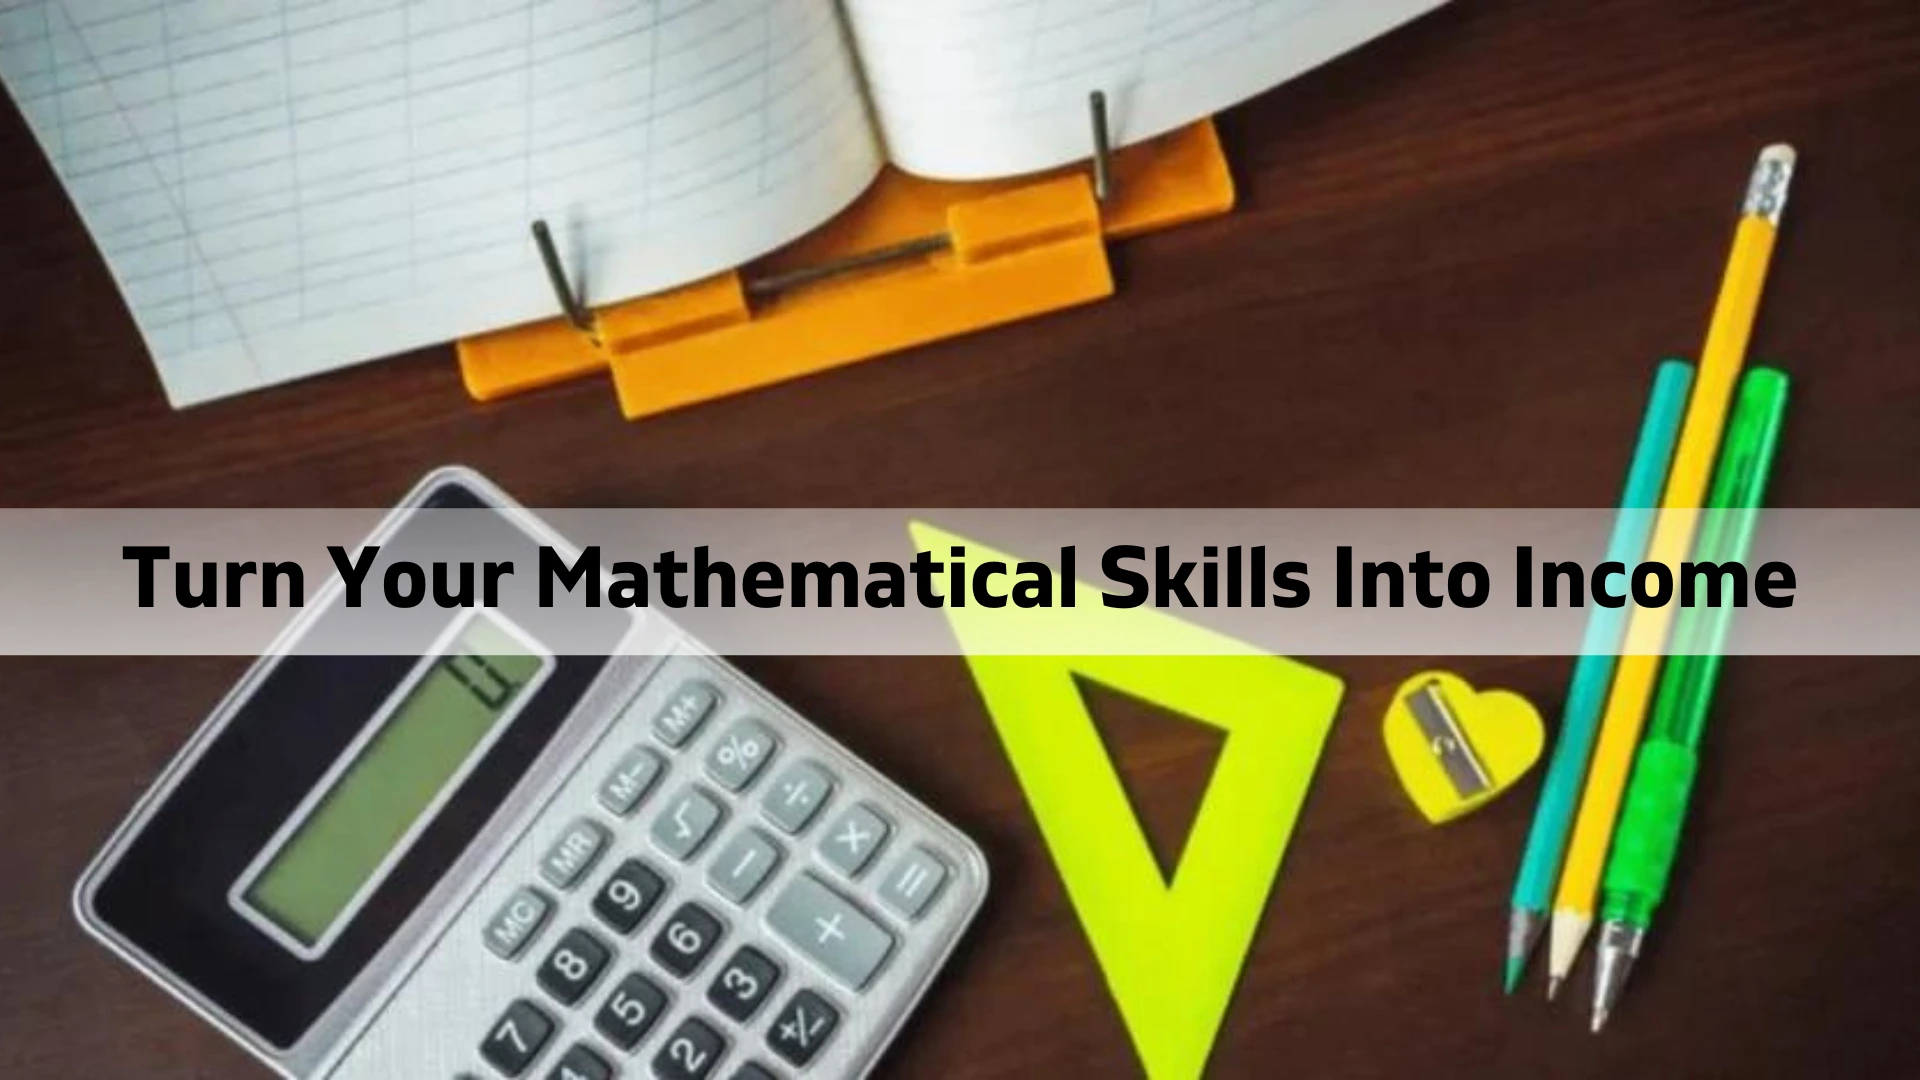 Turn Your Mathematical Skills Into Income: A Comprehensive Guide to Earning Money by Solving Math Problems